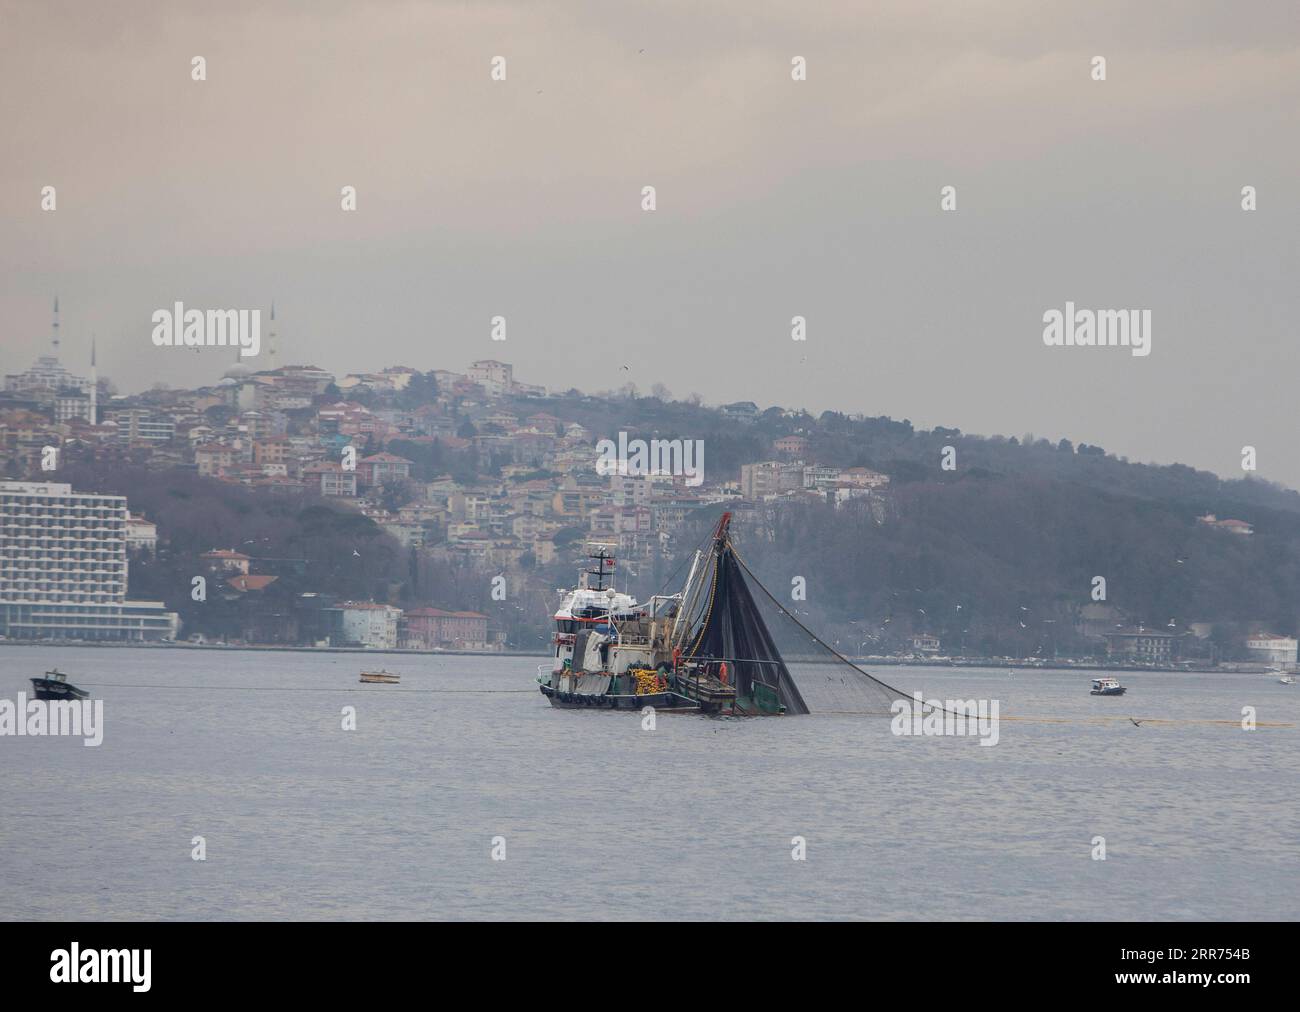 210312 -- ISTANBUL, March 12, 2021 -- A fishing boat is seen on the Black Sea in Istanbul, Turkey, on March 6, 2021. The Black Sea is packed with local bottom fishes, including haddock, mullet, and turbot. There are also migrating fishes from the Atlantic Sea, such as bonito, bluefish, anchovy, and horse-mackerel. However, climate change, overfishing, and other natural causes have had tremendous adverse impacts on the stocks of fisheries and aquaculture. Restrictions related to the COVID-19 pandemic, as well as the rising costs of labor, fuel, and equipment also preoccupy the fishermen. Photo Stock Photo